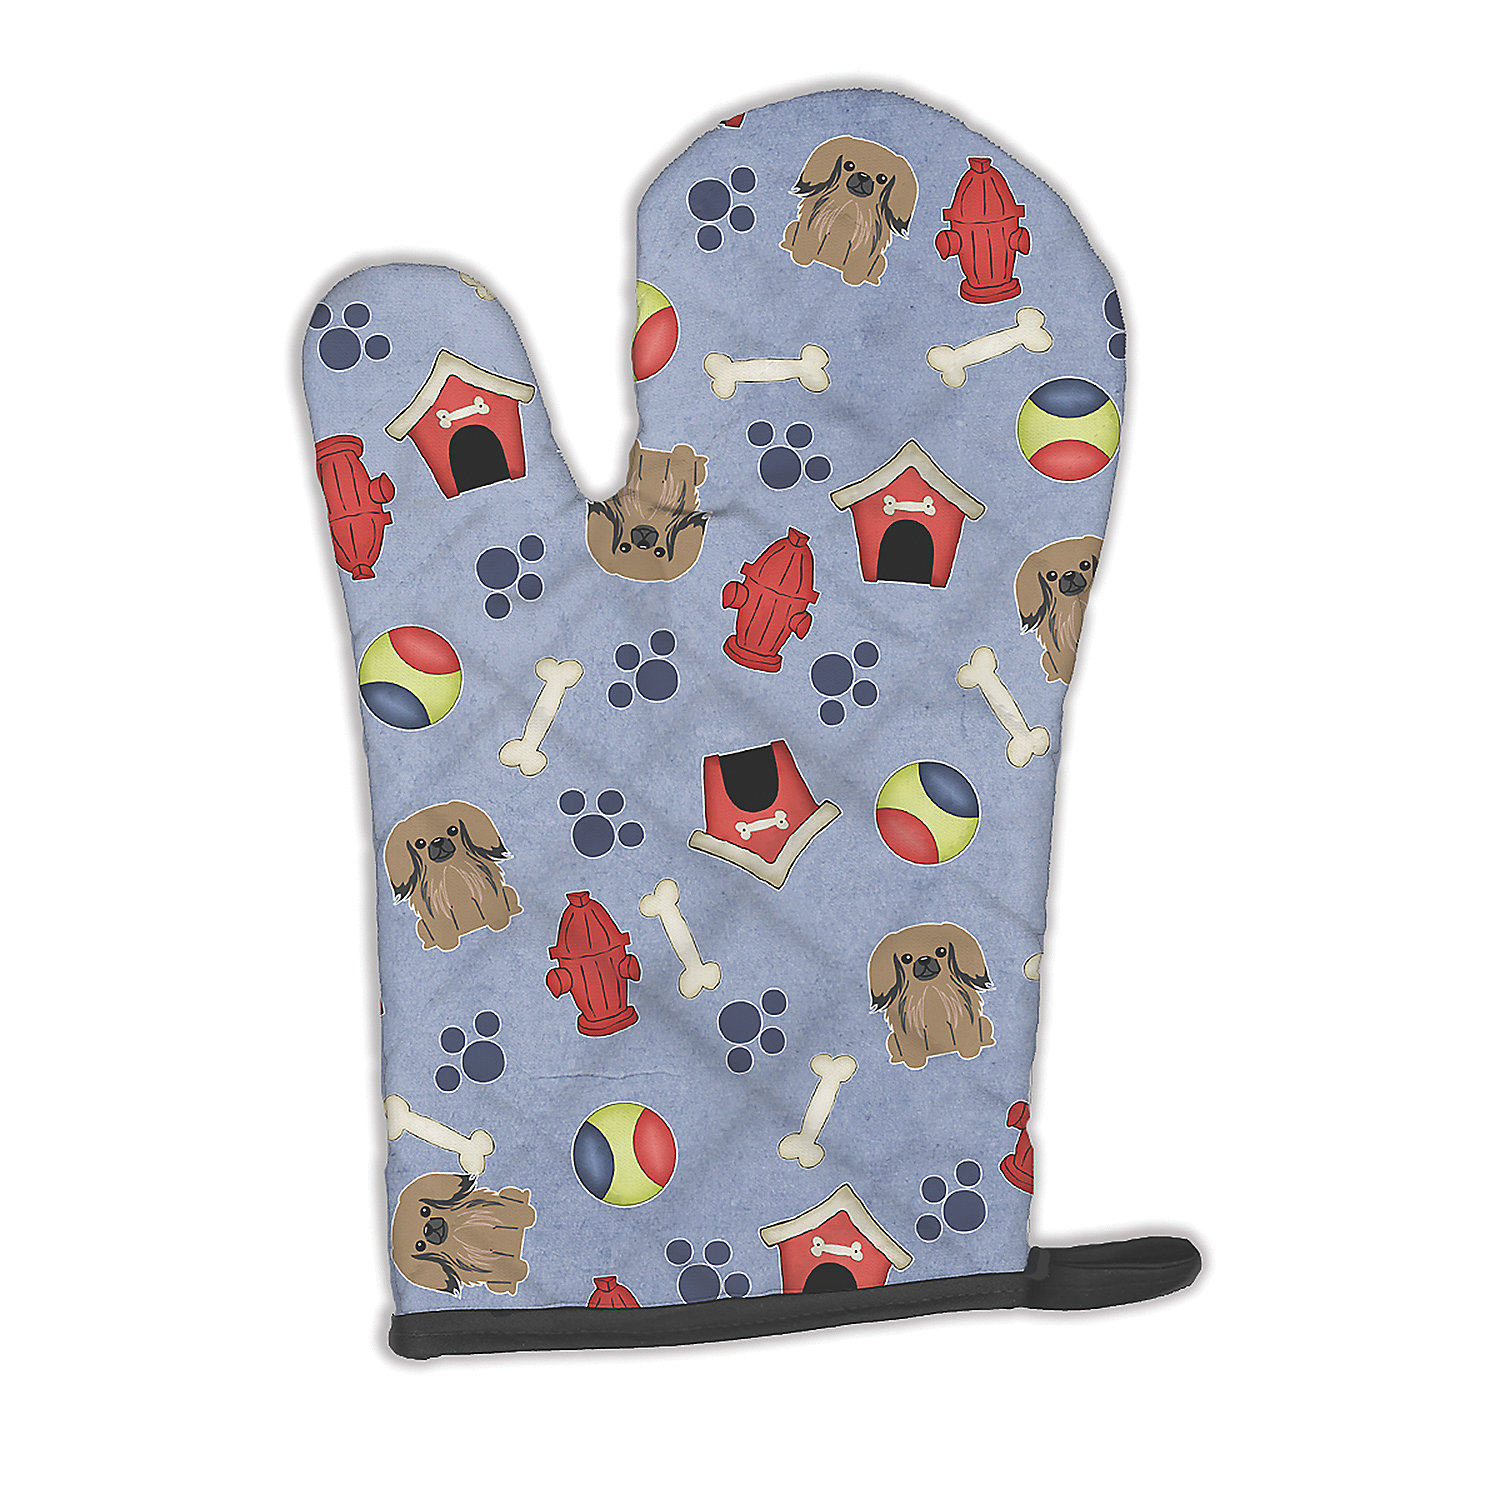 Carolines Treasures BB2715OVMT Dog House Collection Pekingnese Tan Oven Mitt 12 by 8.5 Multicolor 